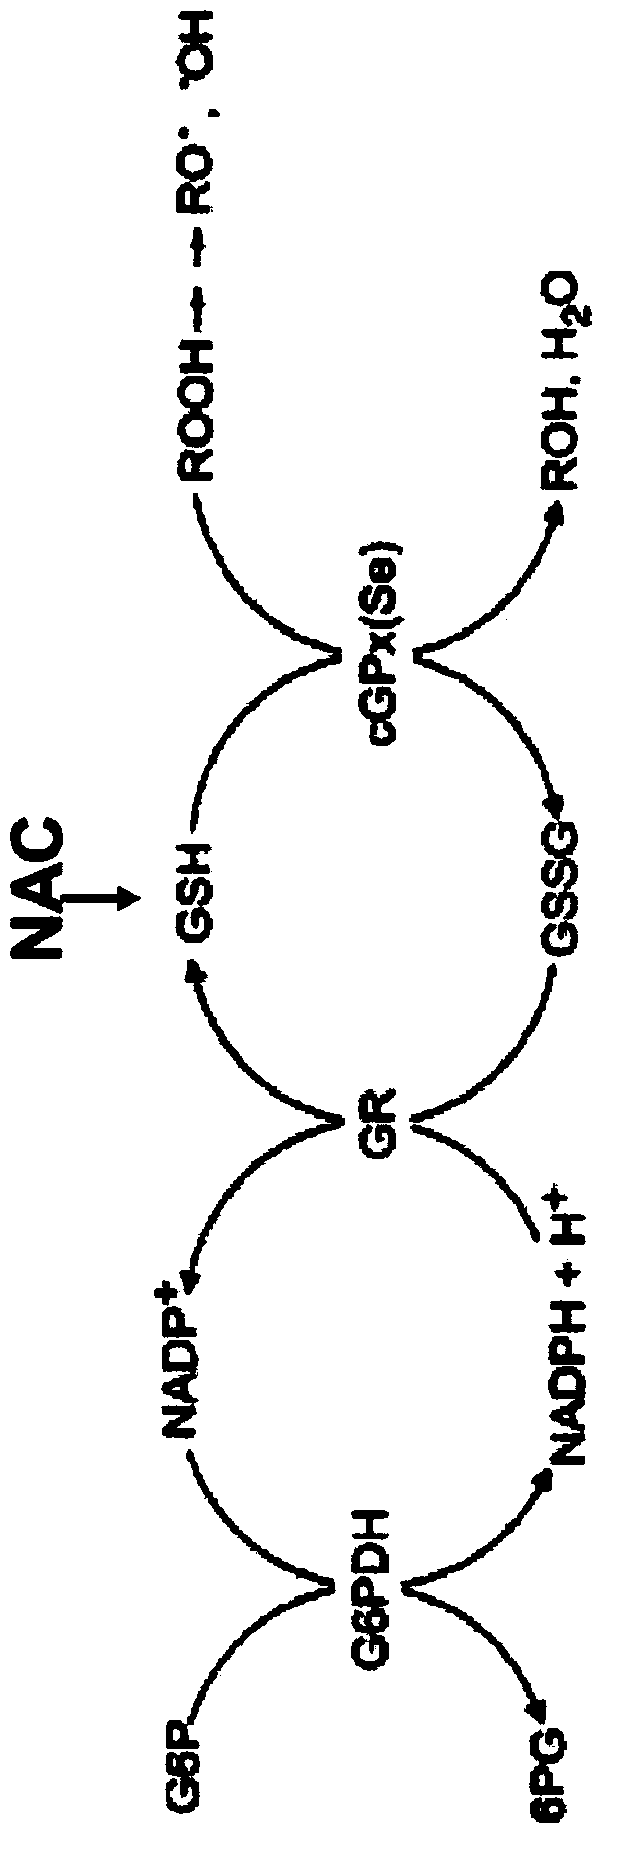 New combination comprising N-acetyl-L-cysteine and its use